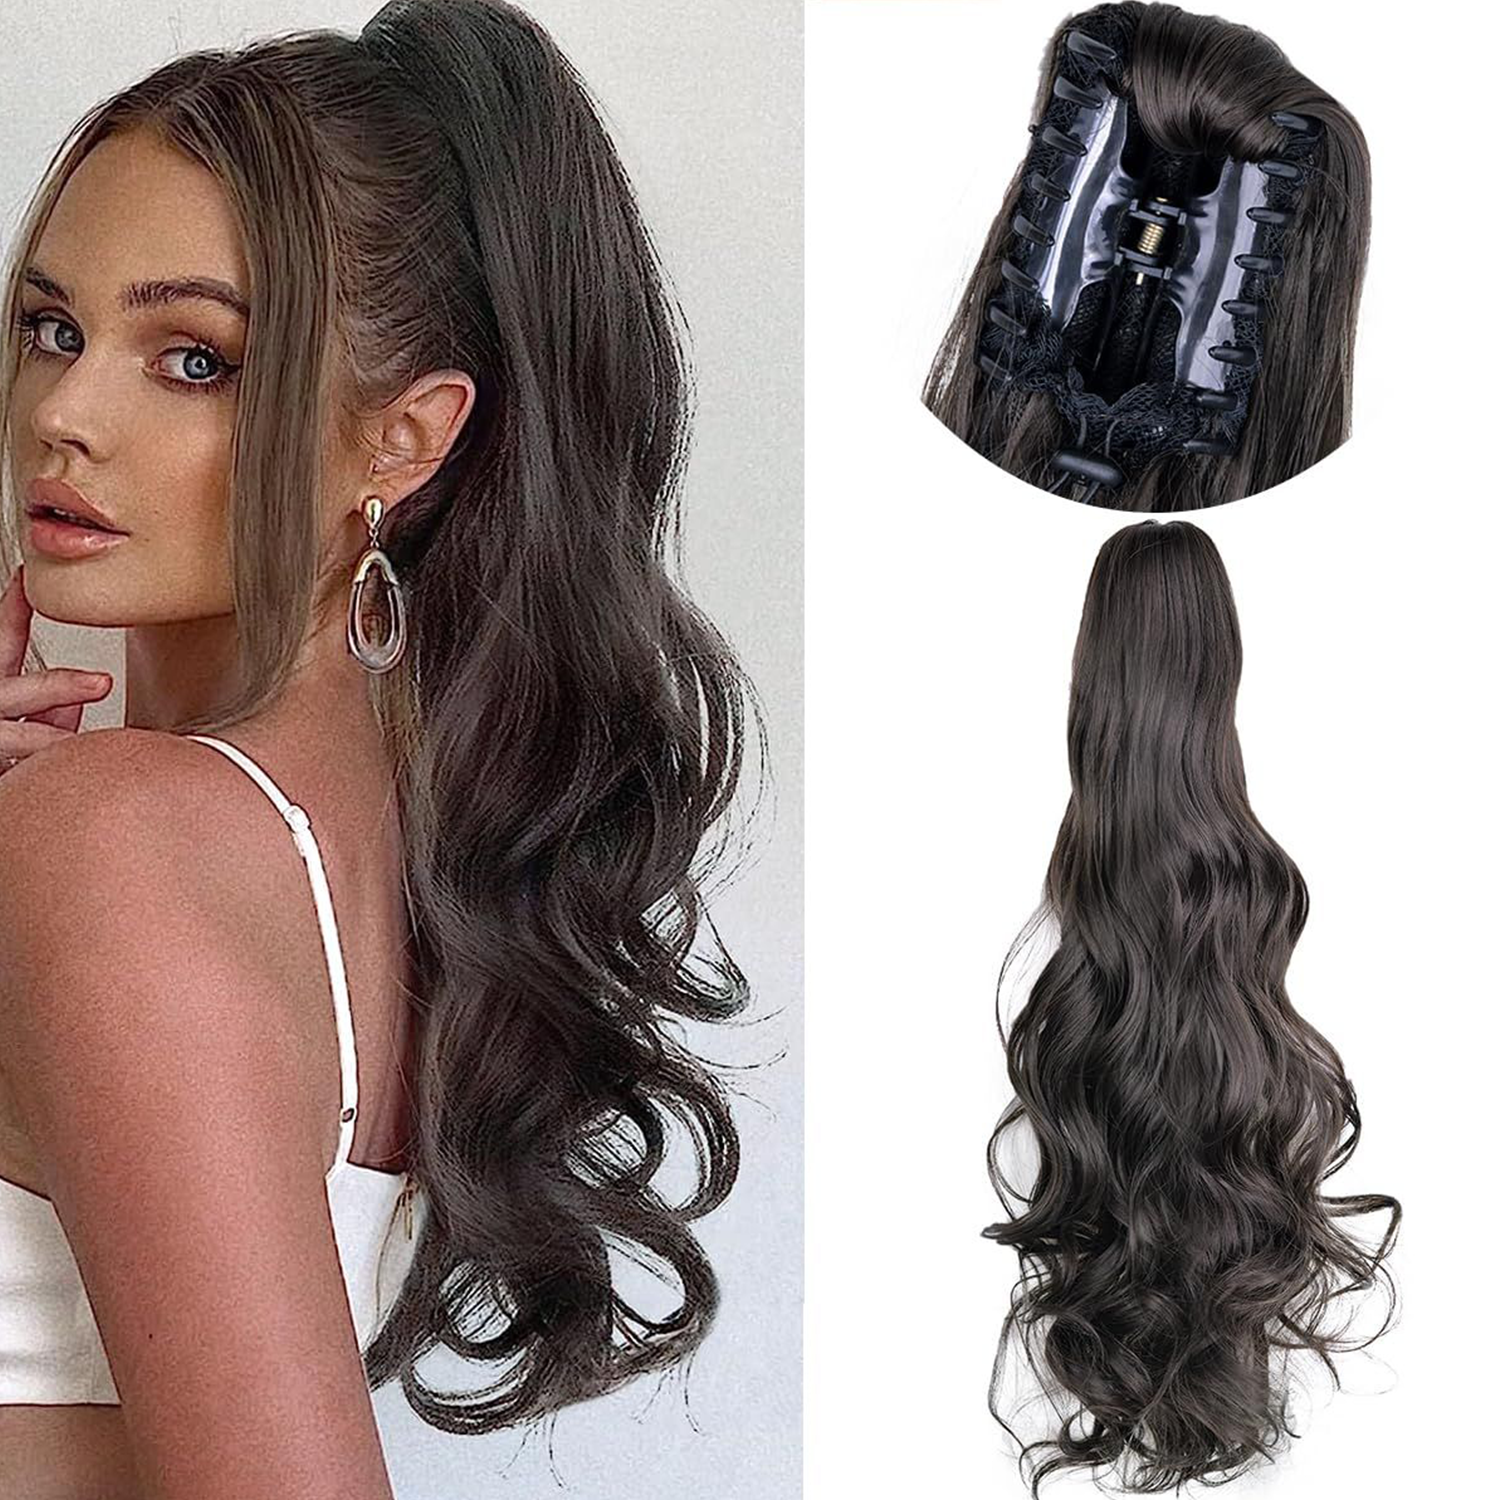 Ponytail Extensions Donker Bruin - Clip In Hairextensions - Brazilian Paardenstaart Extension - 45 cm